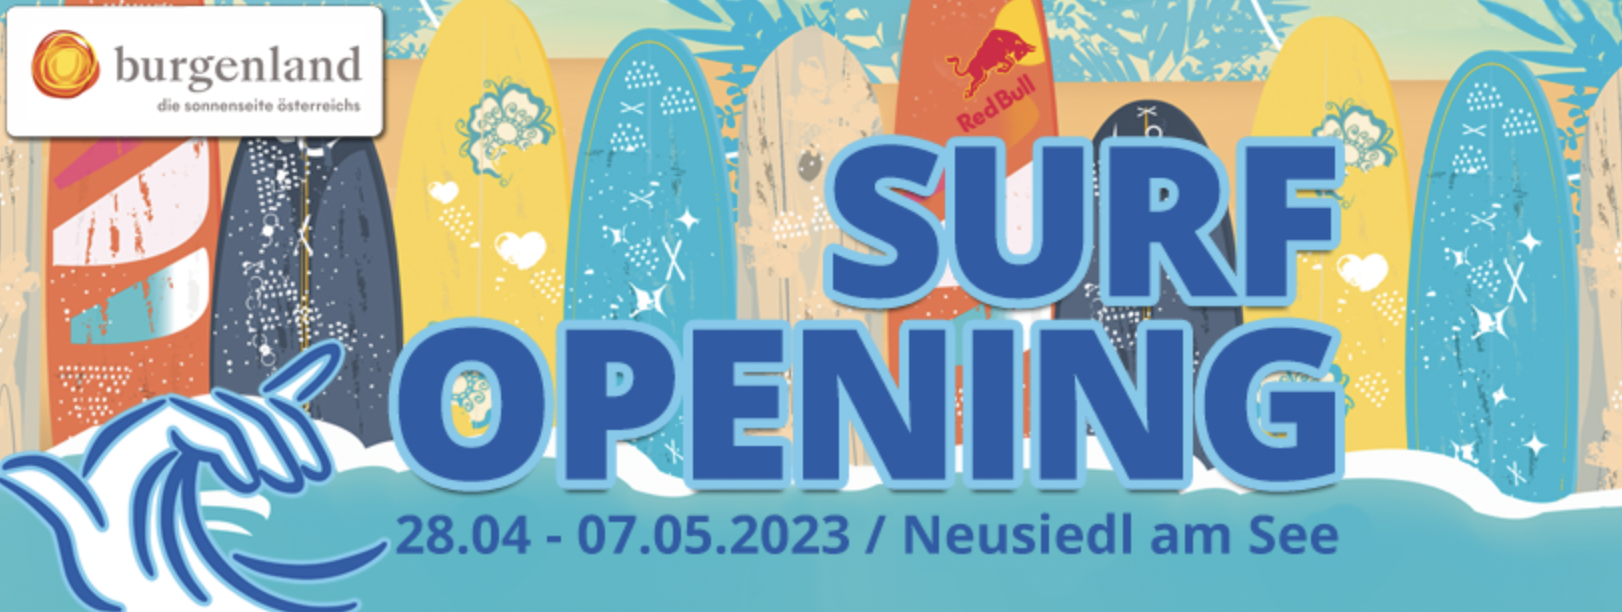 Surf Opening 2023 am 28. April 2023 @ Neusiedl am See.